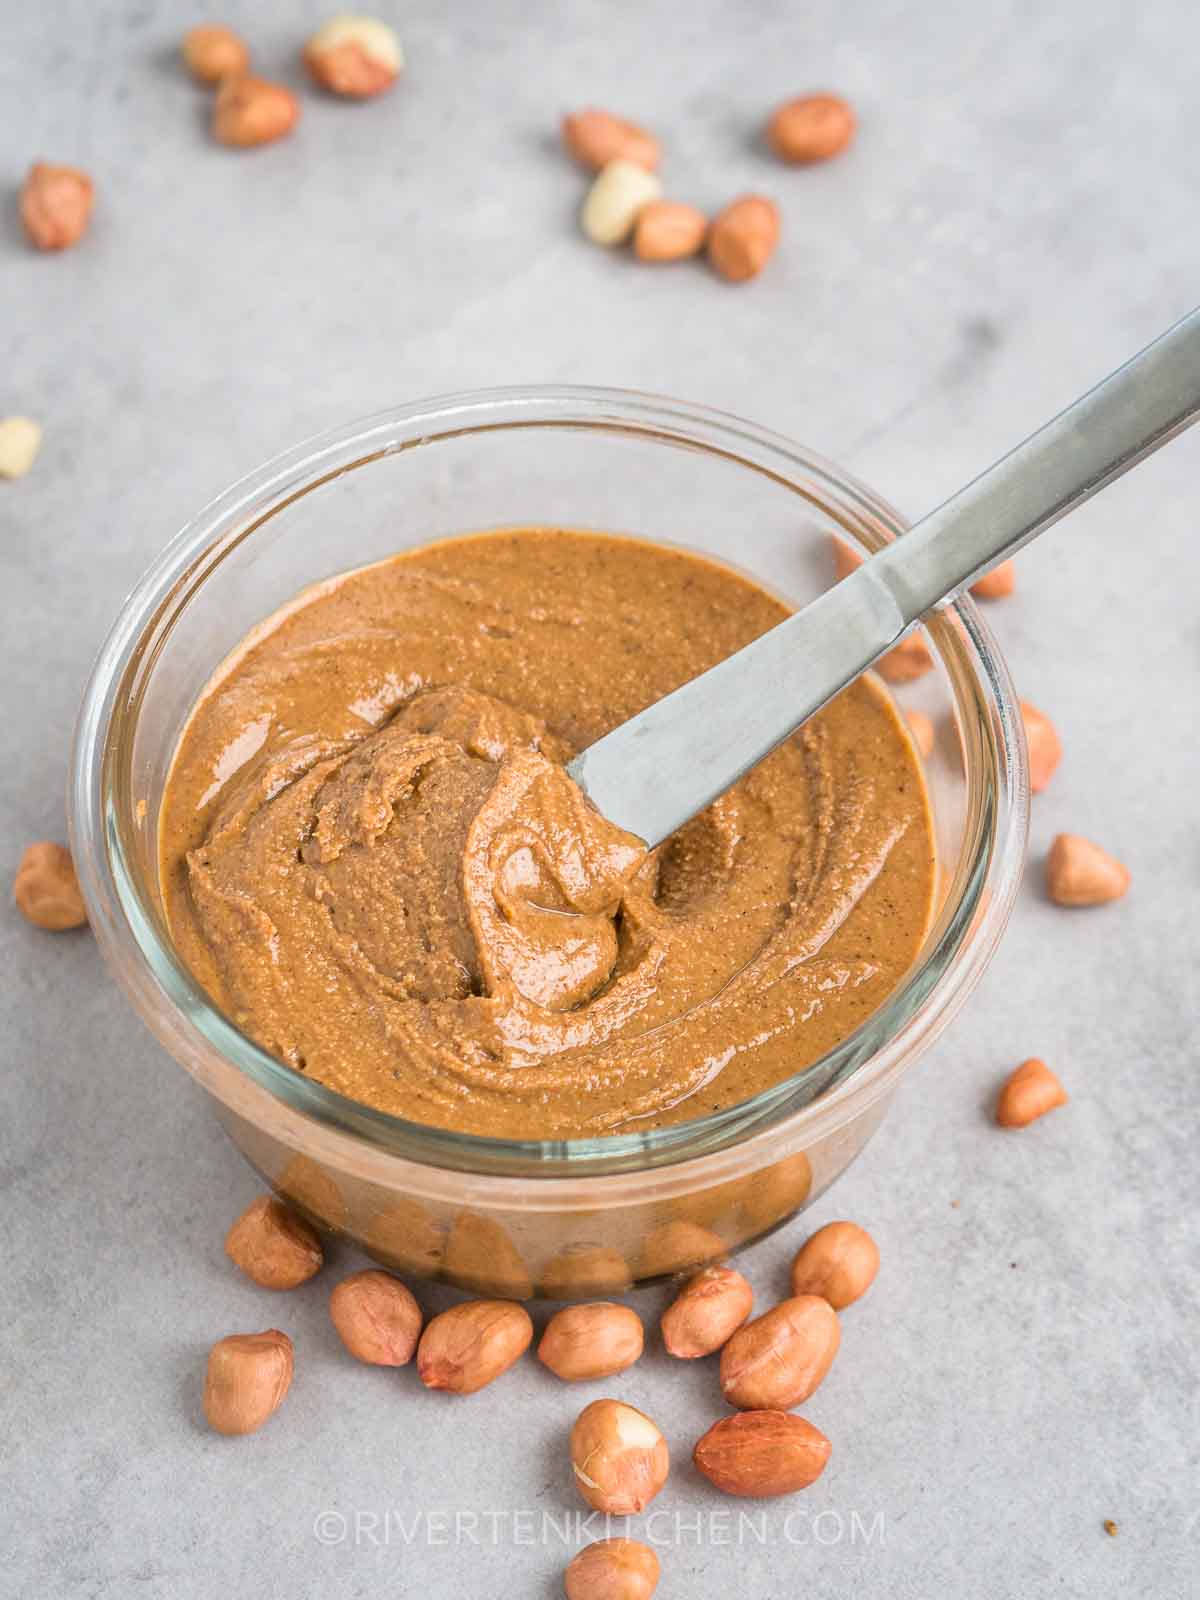 roasted peanut butter made of raw peanuts